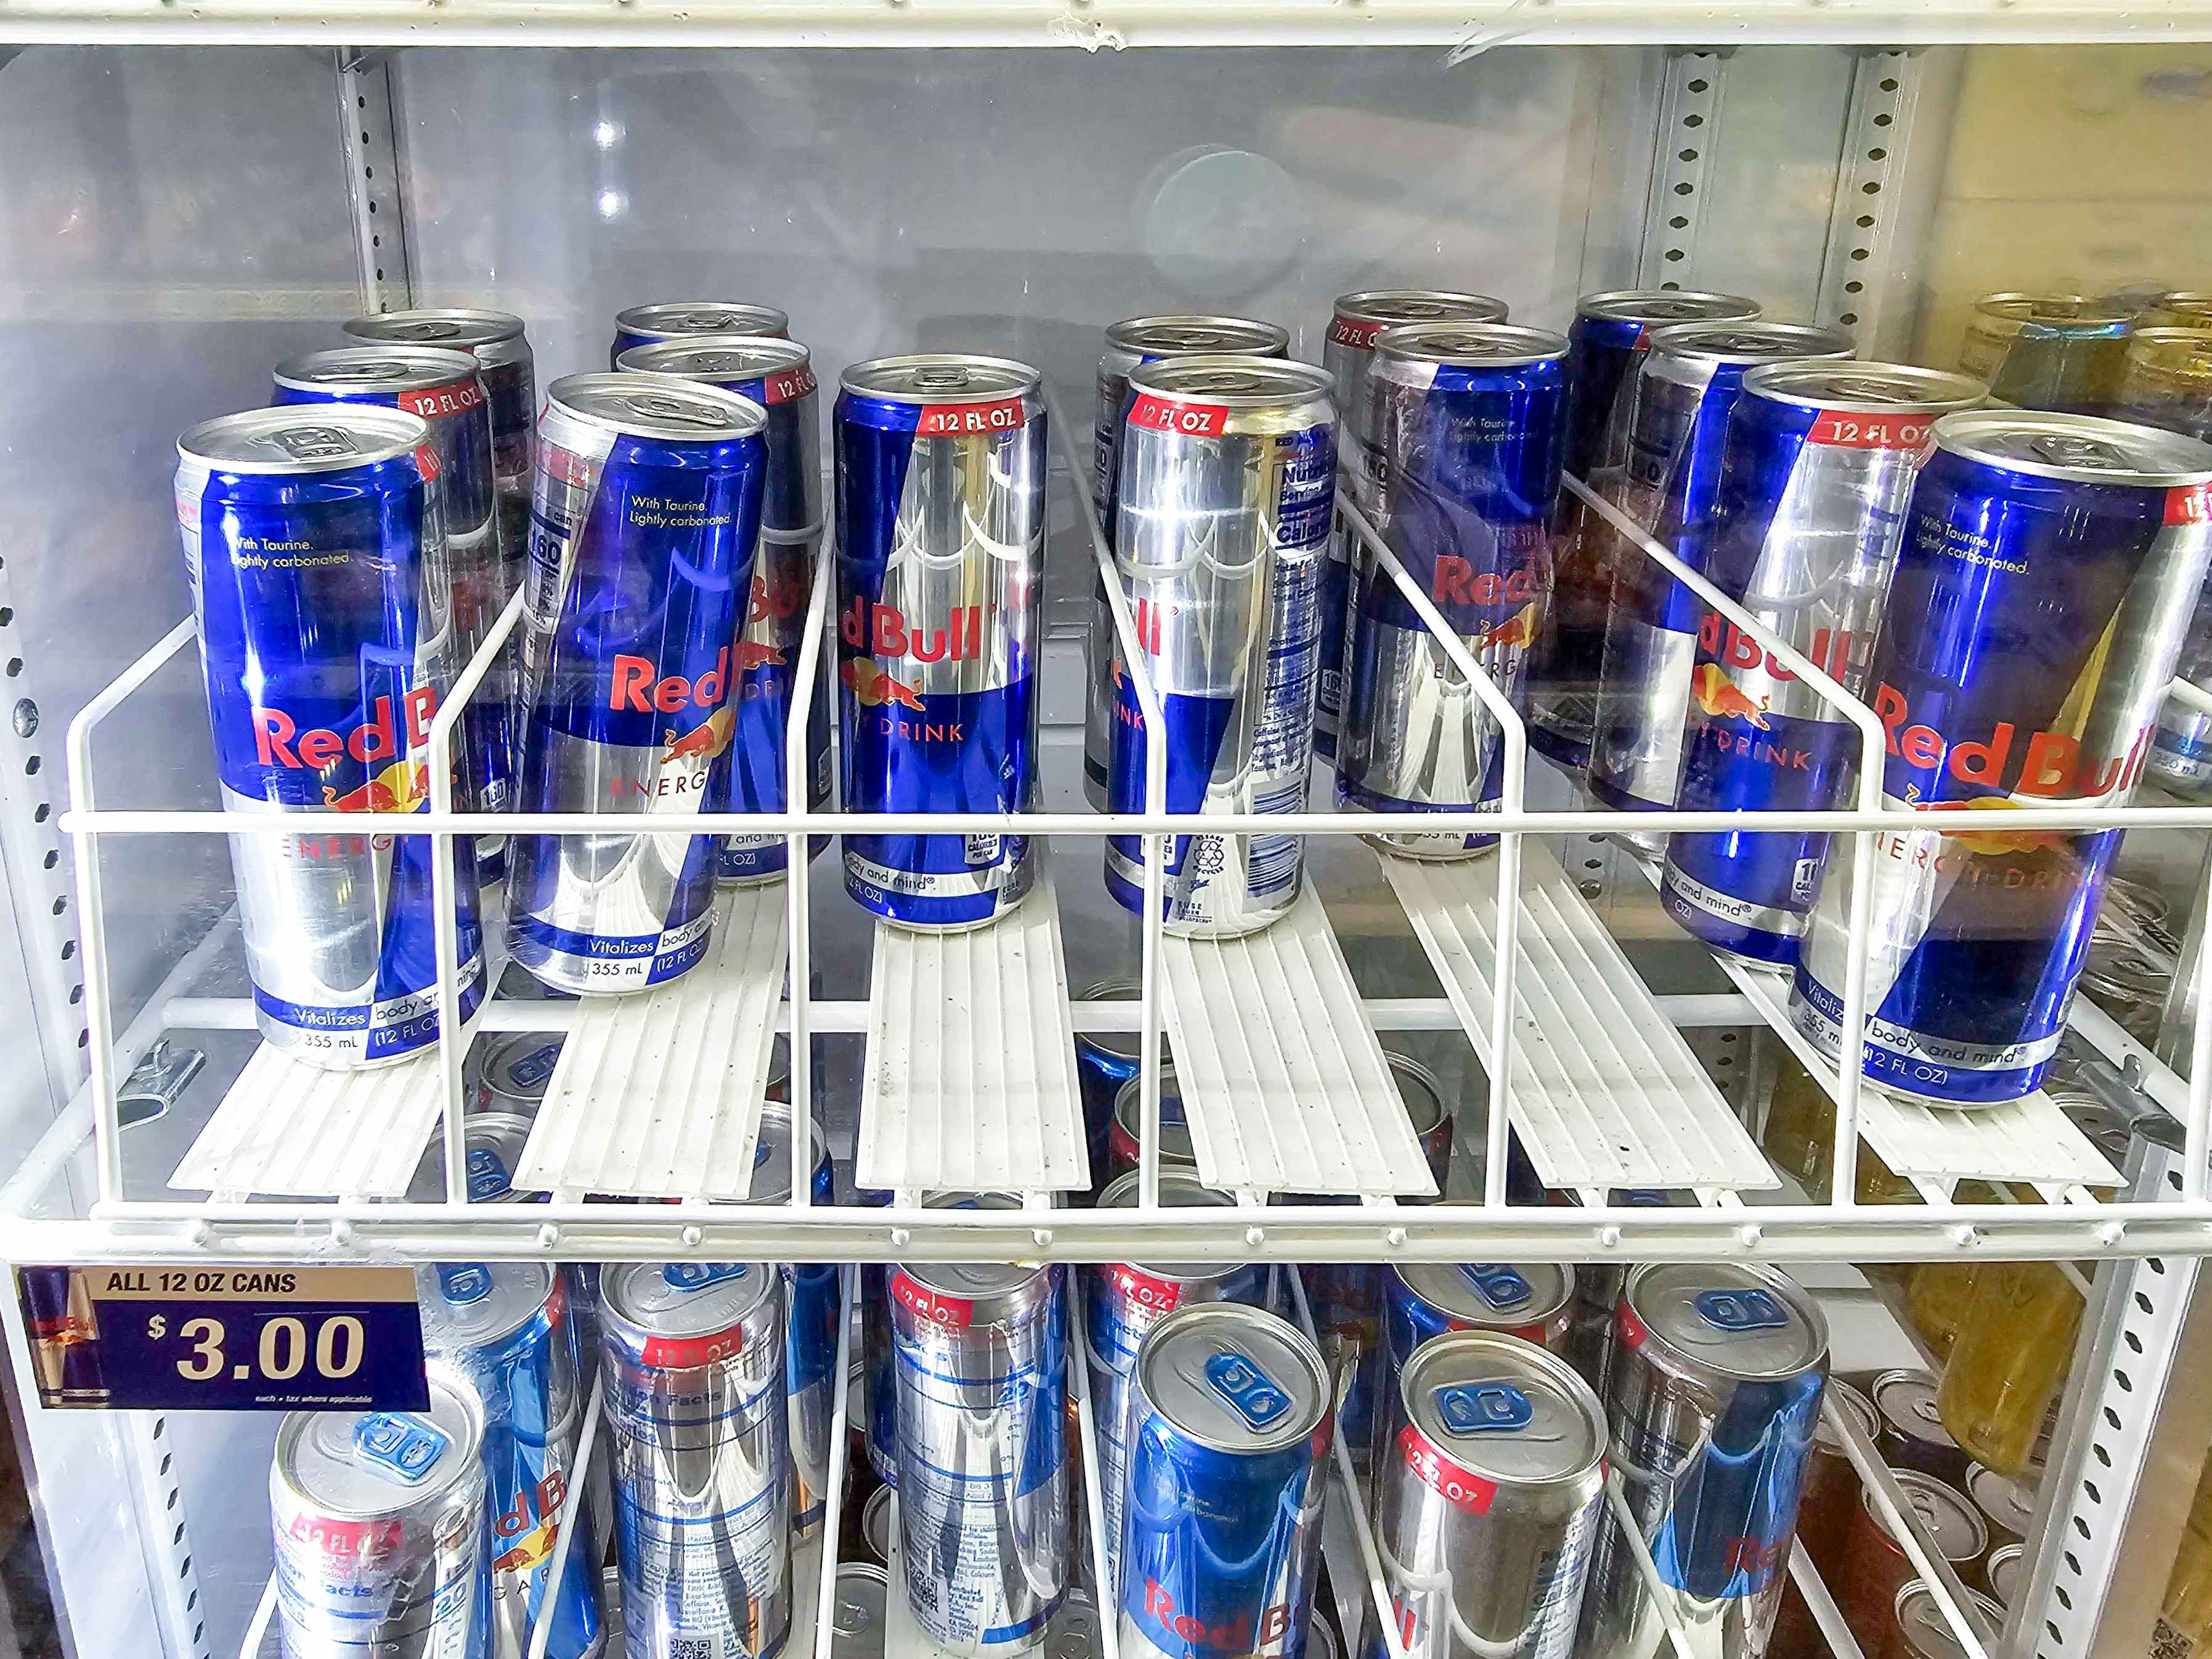 dollar-tree-prices-rising-red-bull-energy-drinks-kcl